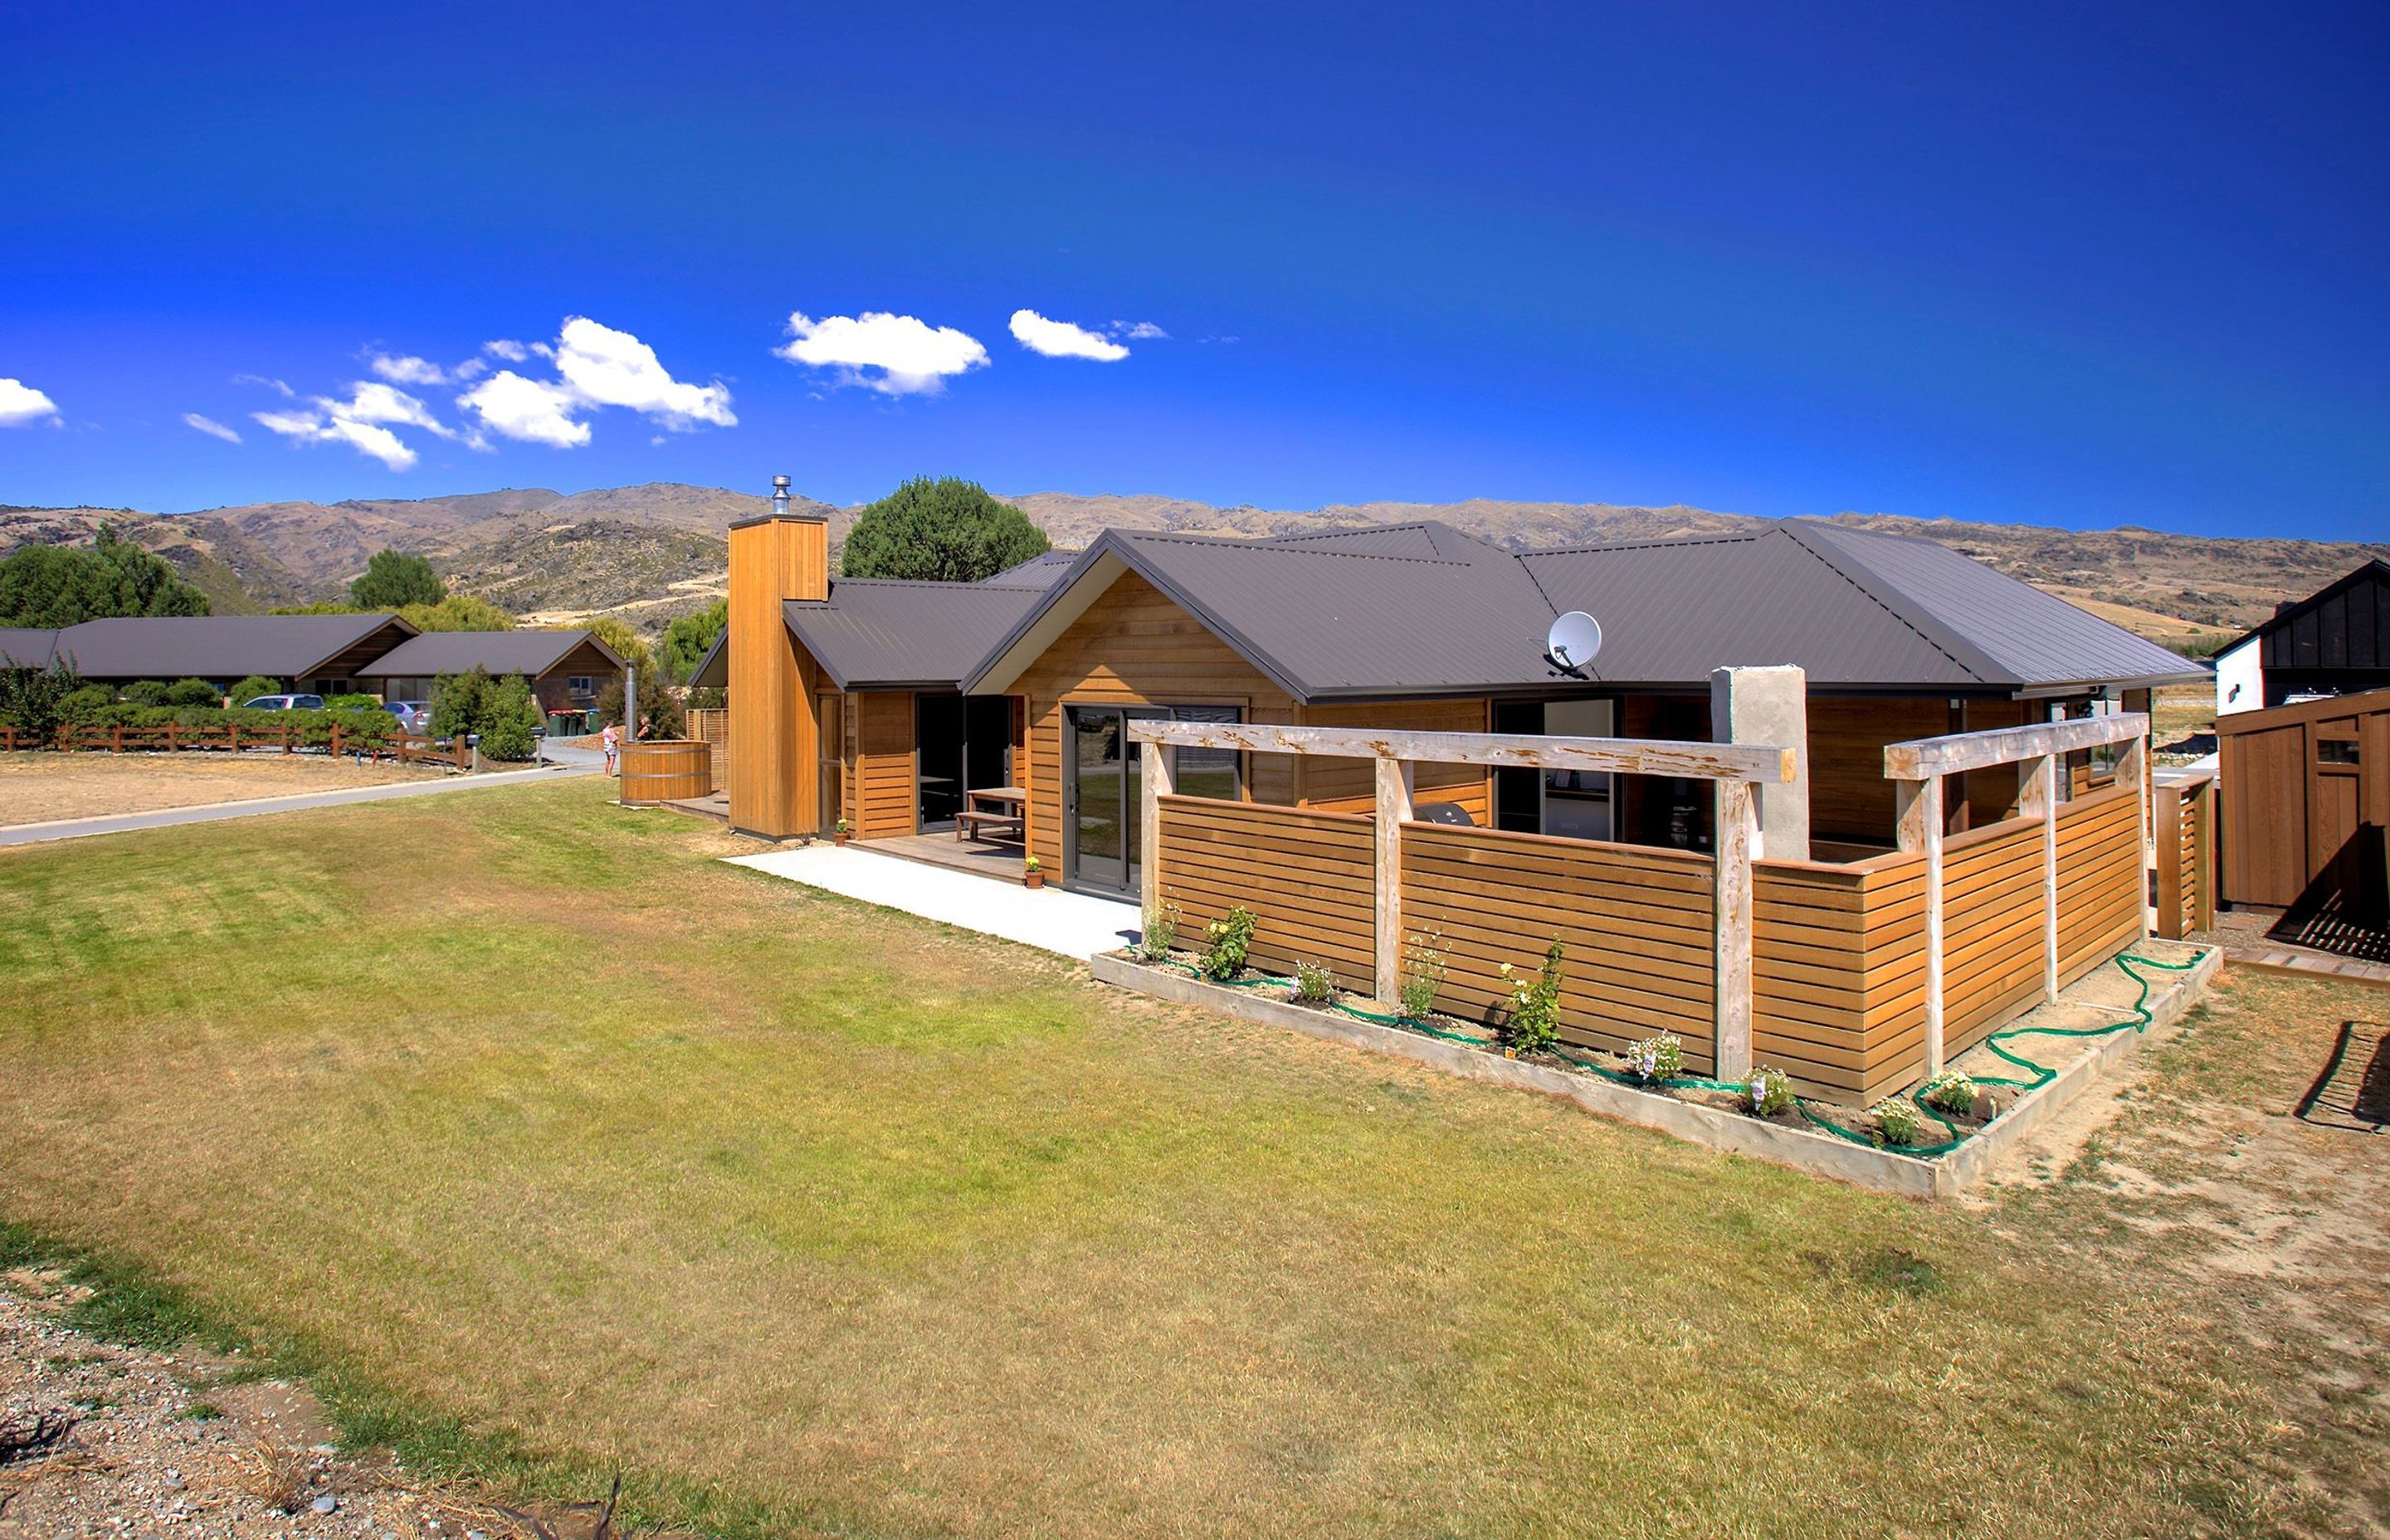 Project Timber: July 2020 - Central Otago House